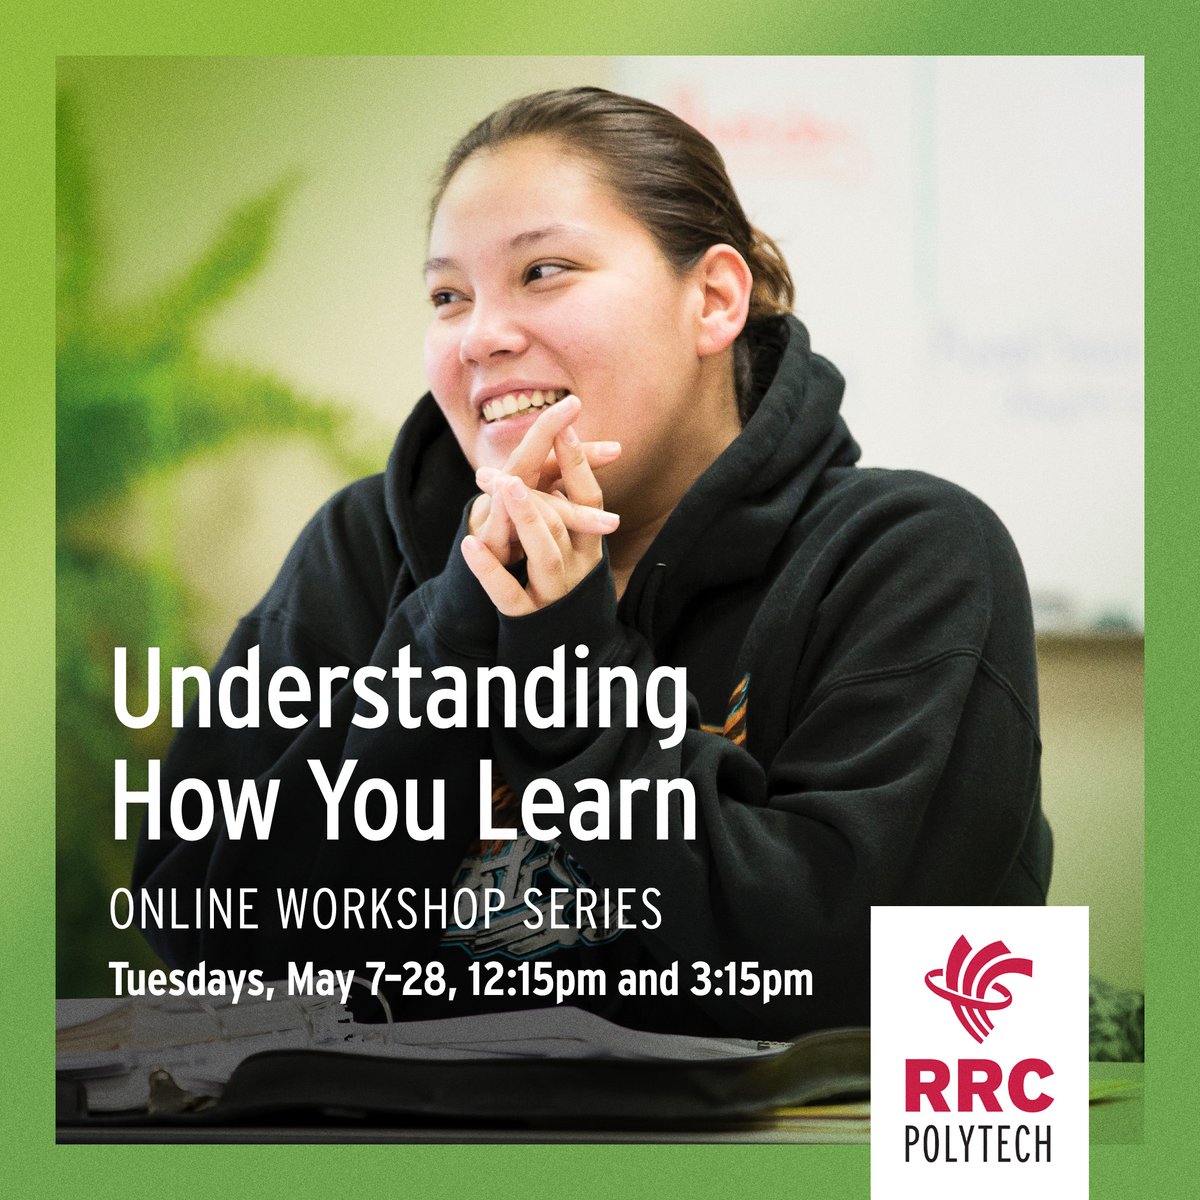 Join the Academic Success Centre every Tuesday in May for an online workshop series called Understanding How You Learn! These workshops will discuss four topics: the brain, critical thinking, stress, and procrastination. Learn more or join by visiting library.rrc.ca/academic_coach…